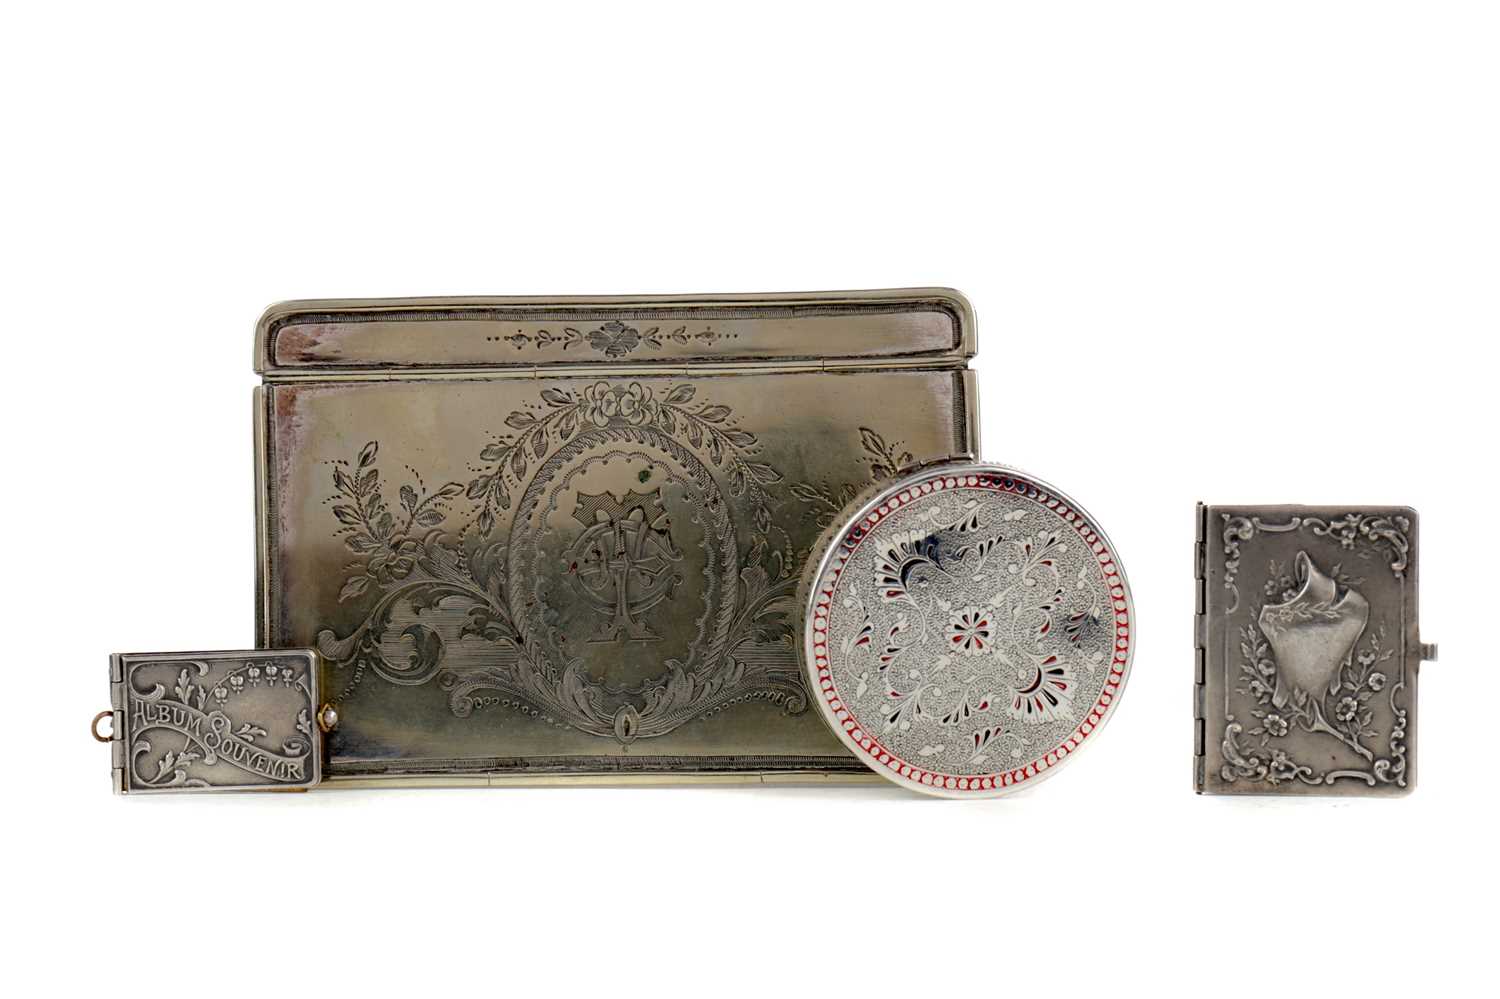 Lot 448 - A VICTORIAN SILVER PLATED CIGARETTE CASKET, ALONG WITH OTHER ITEMS